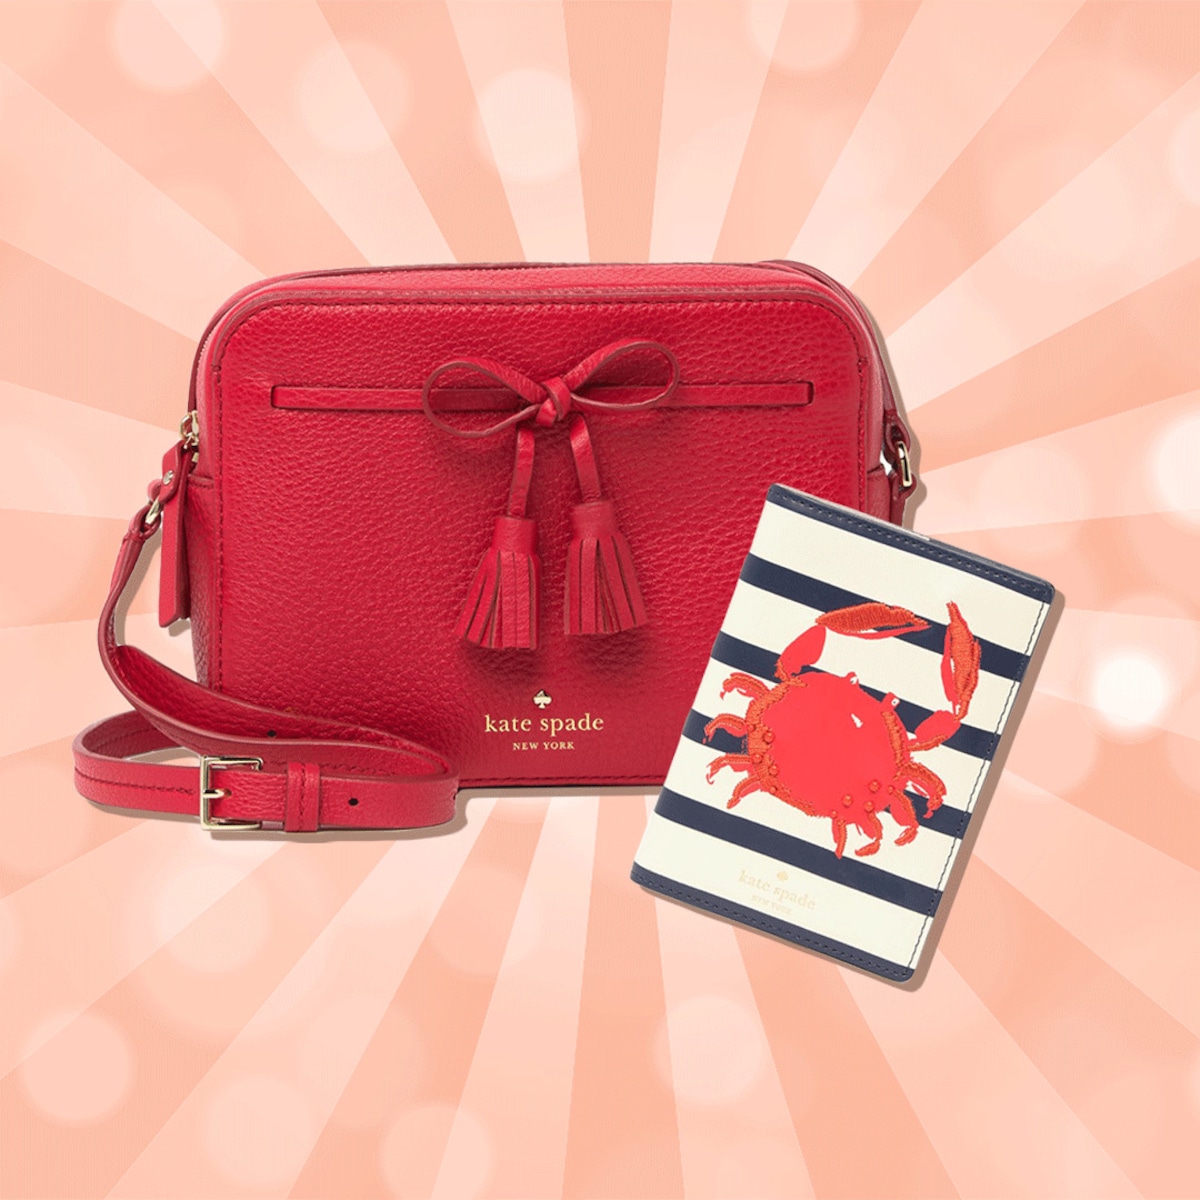 Score Up to 75% Off at This Kate Spade Flash Sale - E! Online - CA